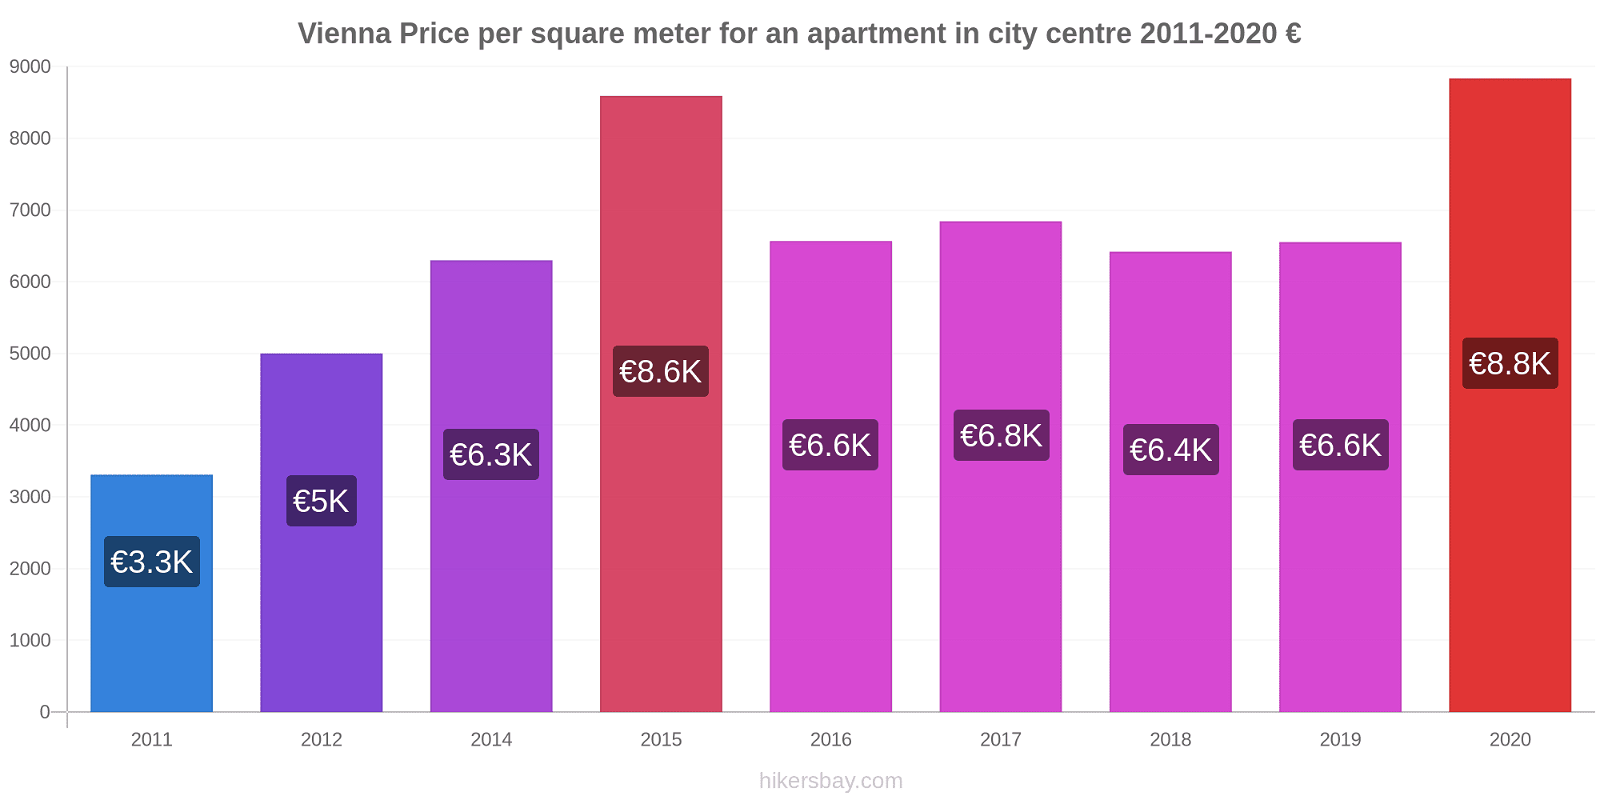 Vienna price changes Price per square meter for an apartment in city centre hikersbay.com